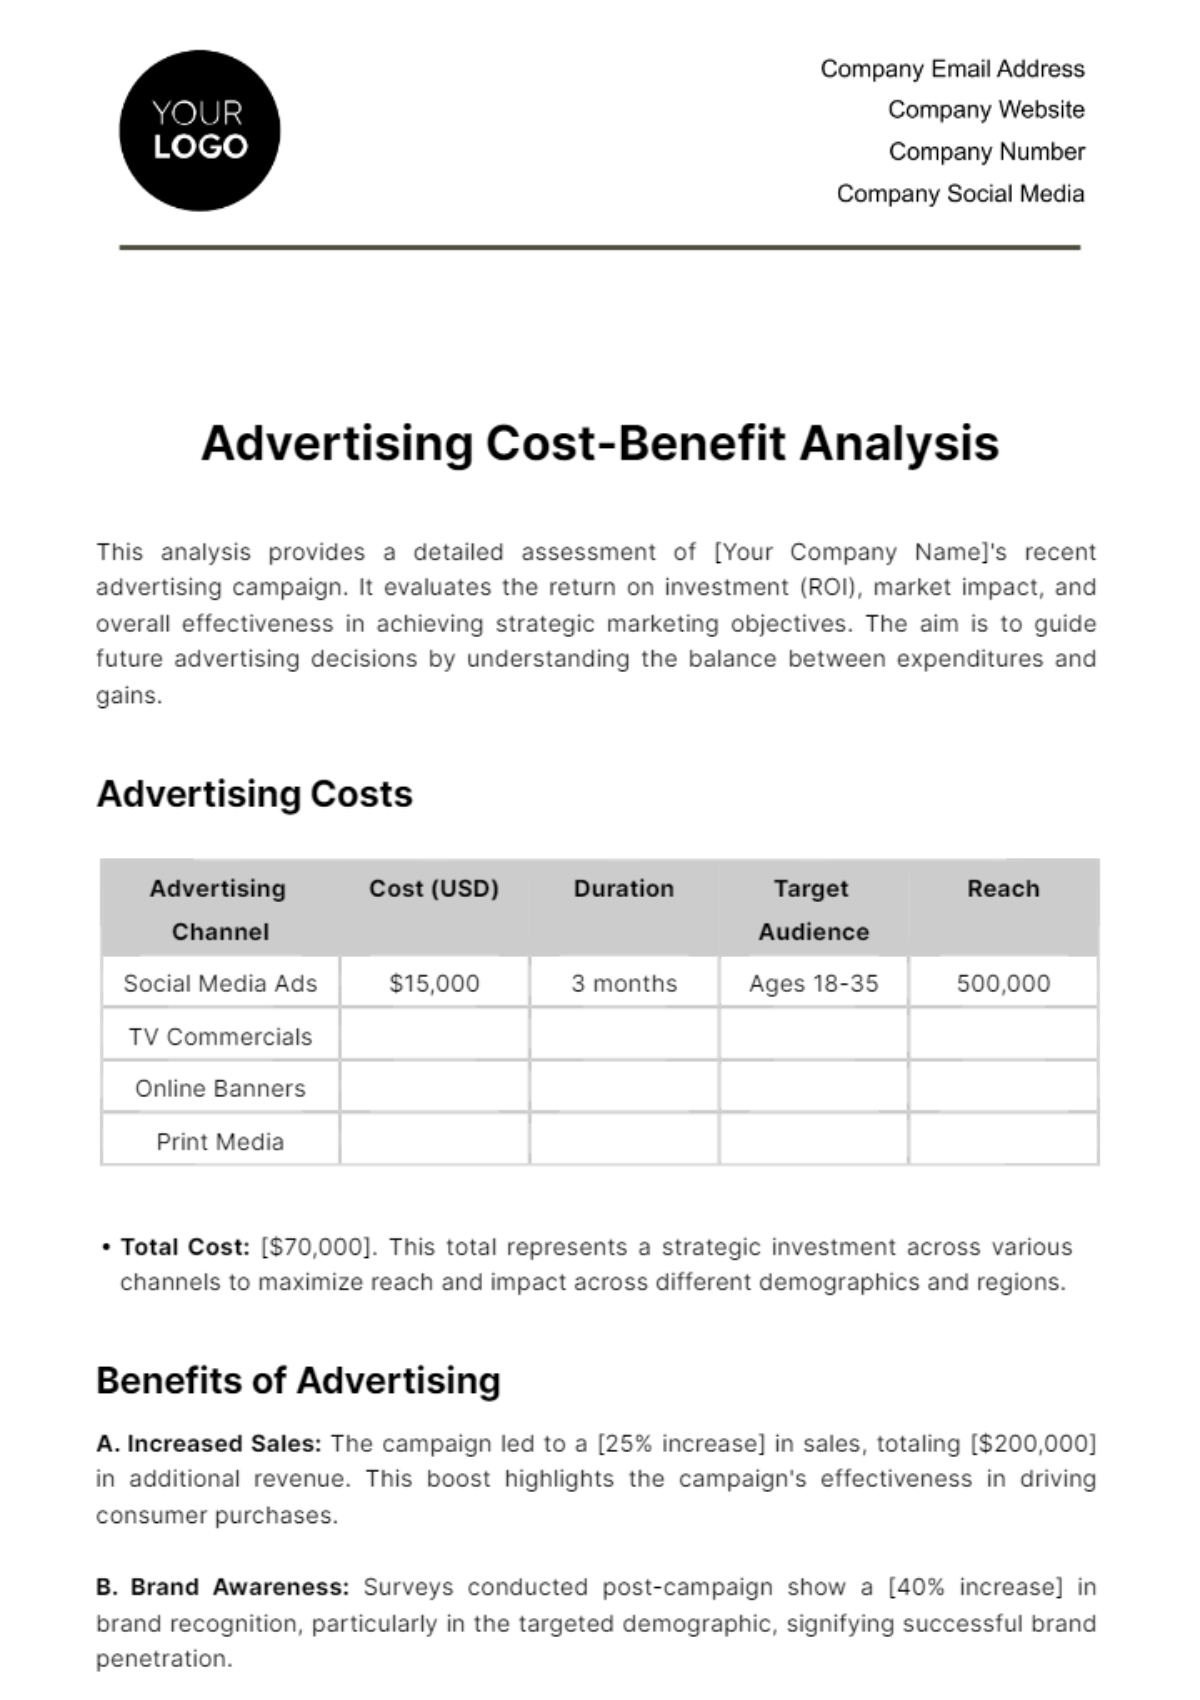 Advertising Cost-Benefit Analysis Template